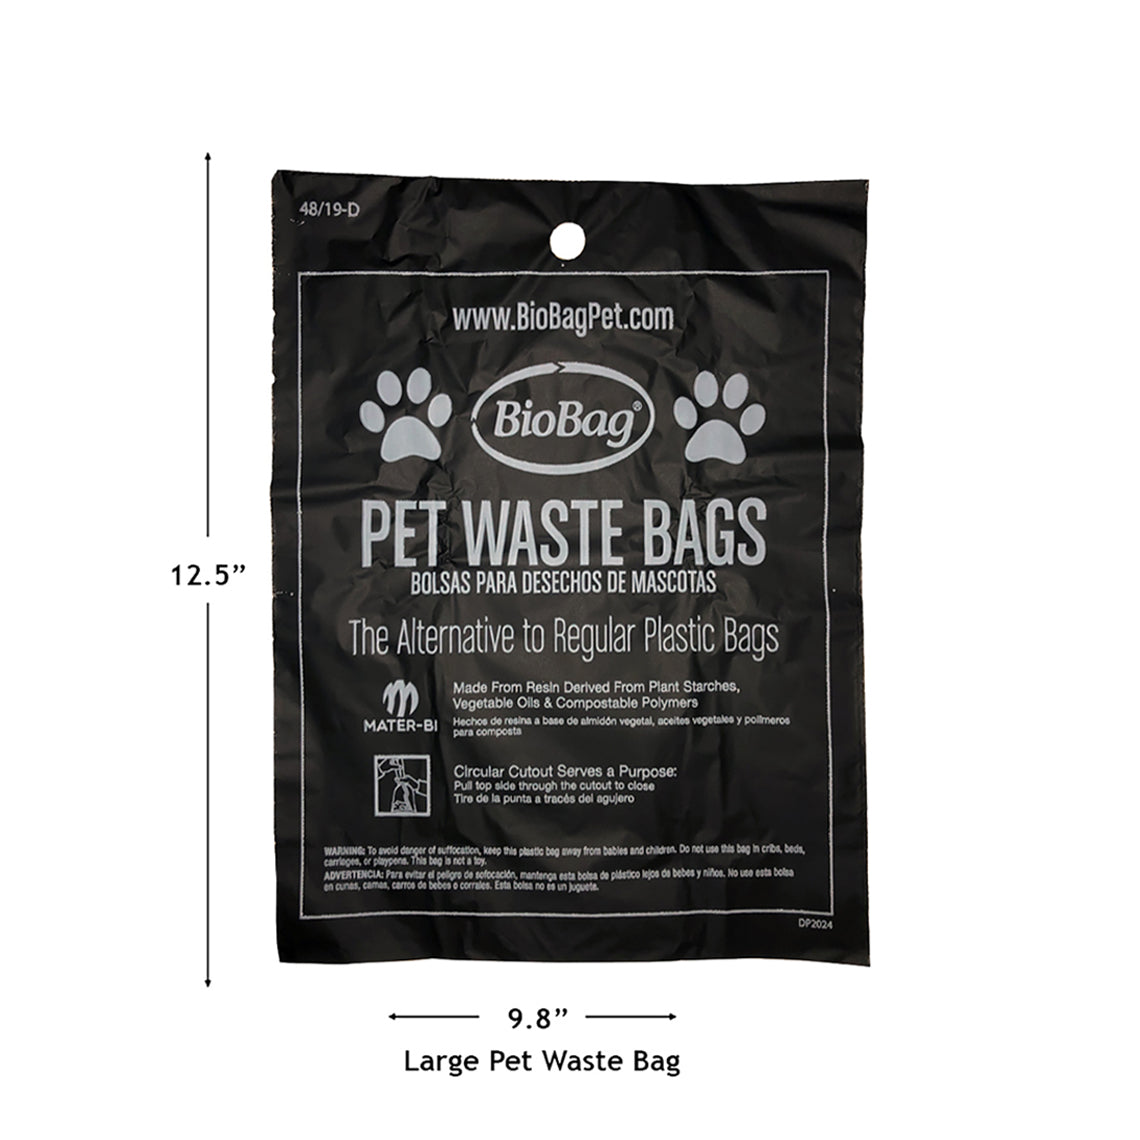 BOB Refill Bags - Blue - 140 bags (10x14) - Naturally For Pets